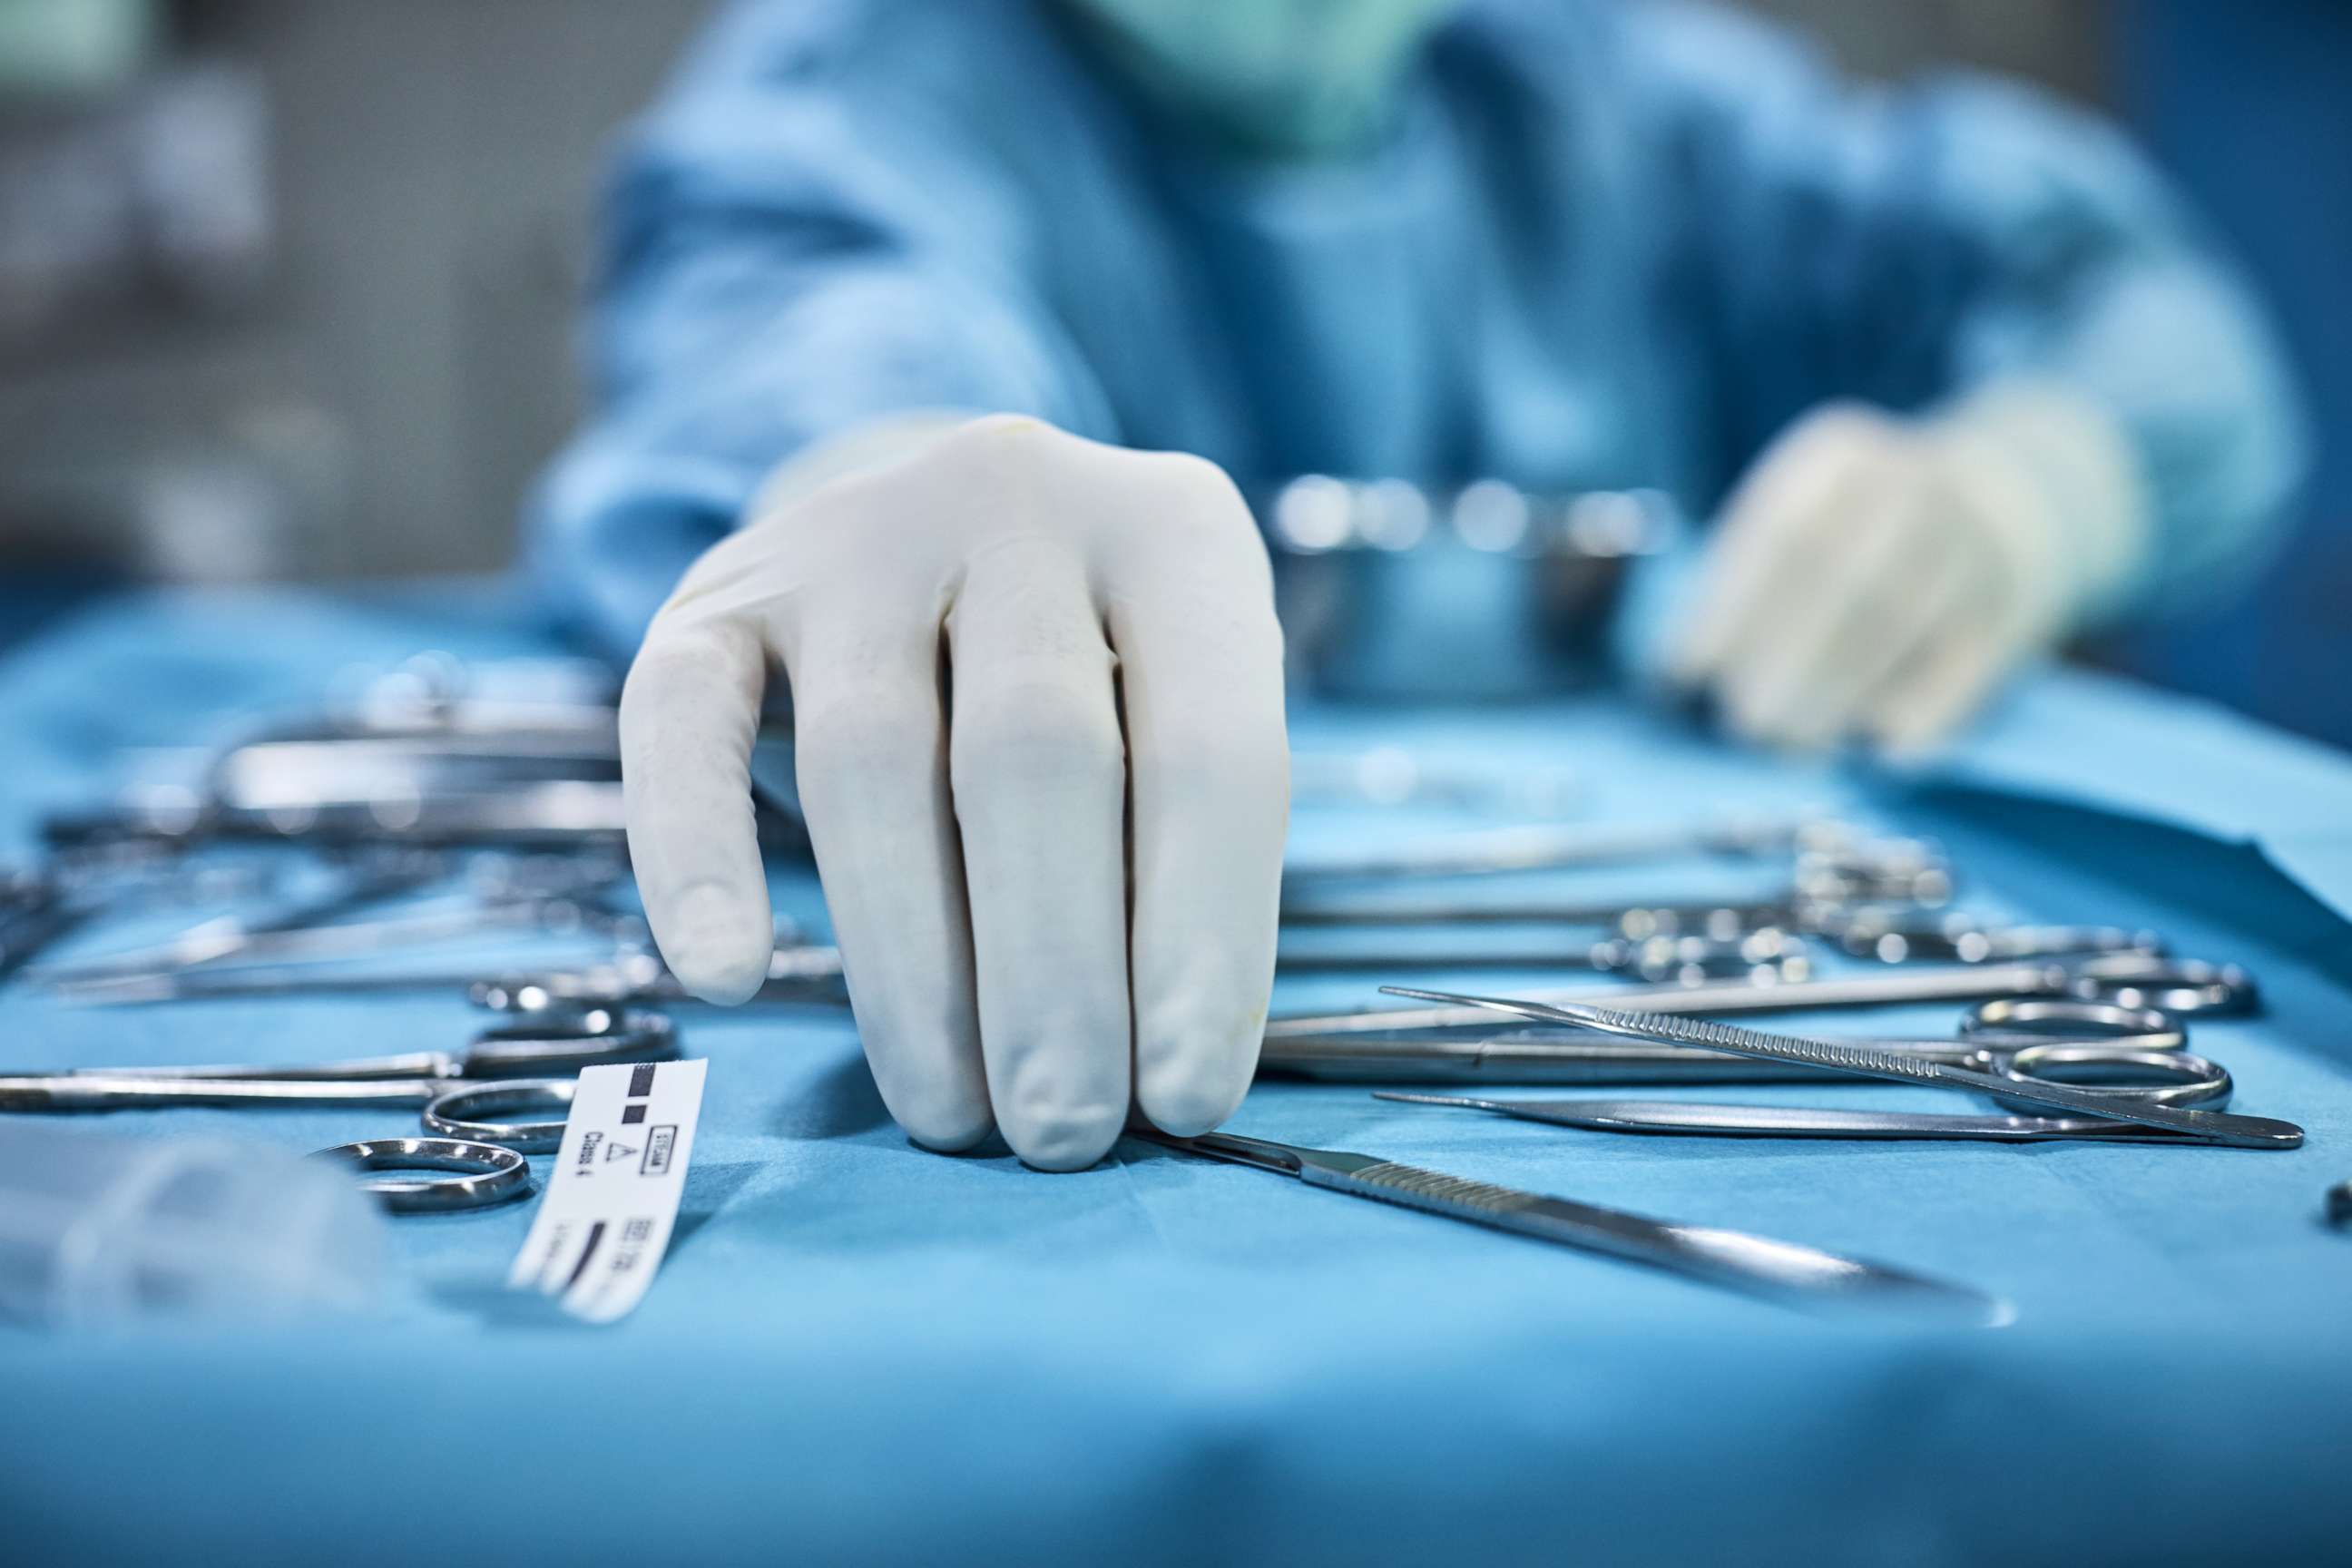 PHOTO: A doctor reaches for surgical instruments in this stock photo.